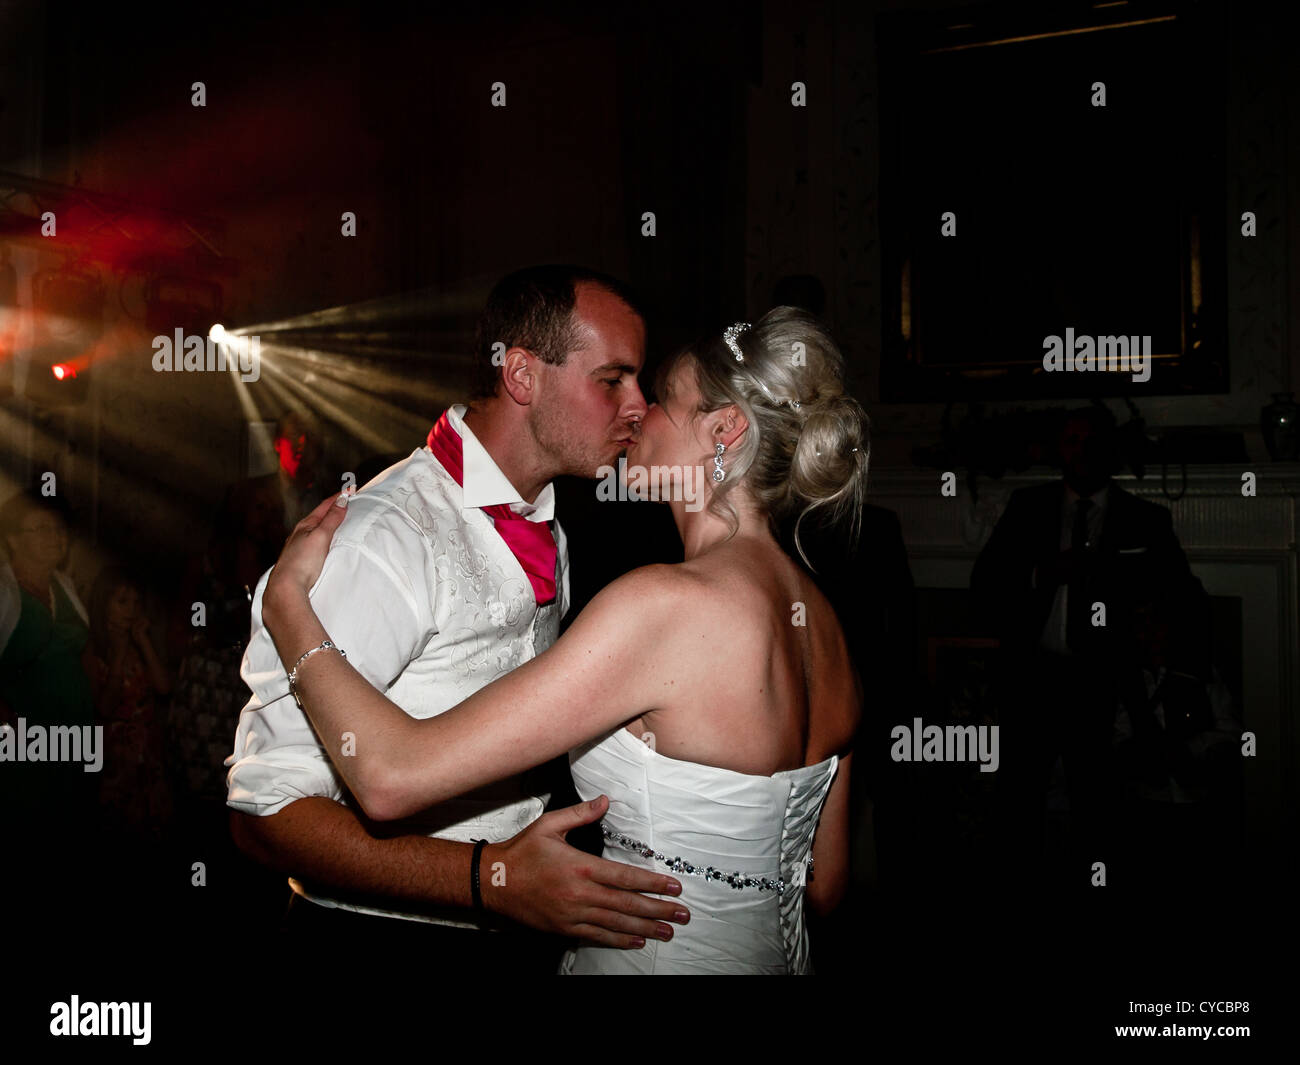 A bride and groom kiss romantically during the first dance on their wedding day. Stock Photo